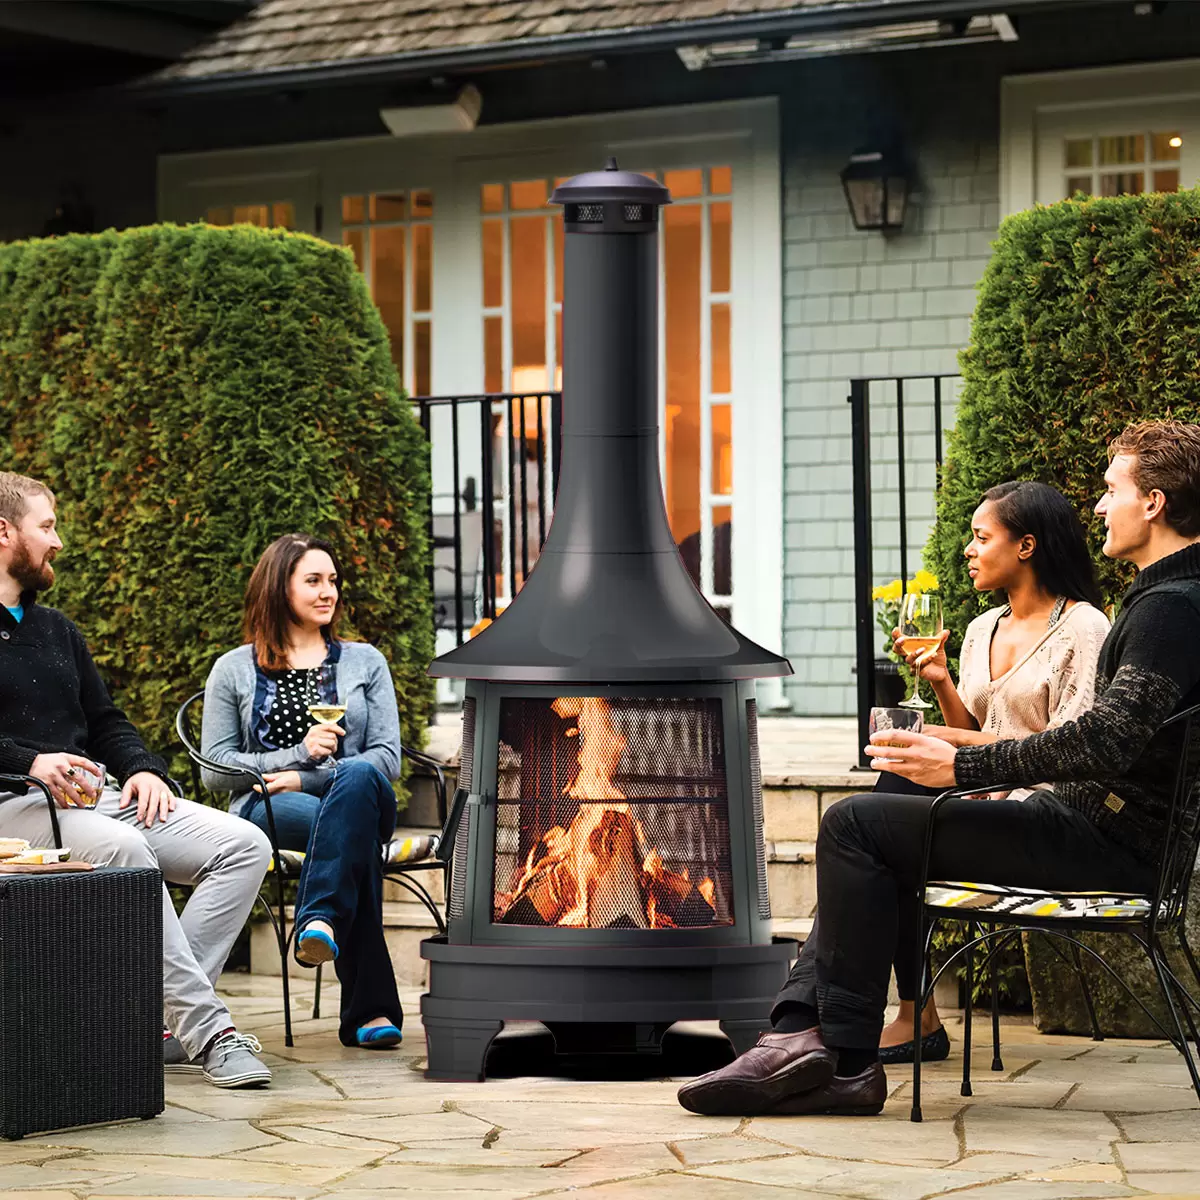 Outdoor 1.75m Steel Chiminea Fireplace with Cooking Grill - MSFMART UK